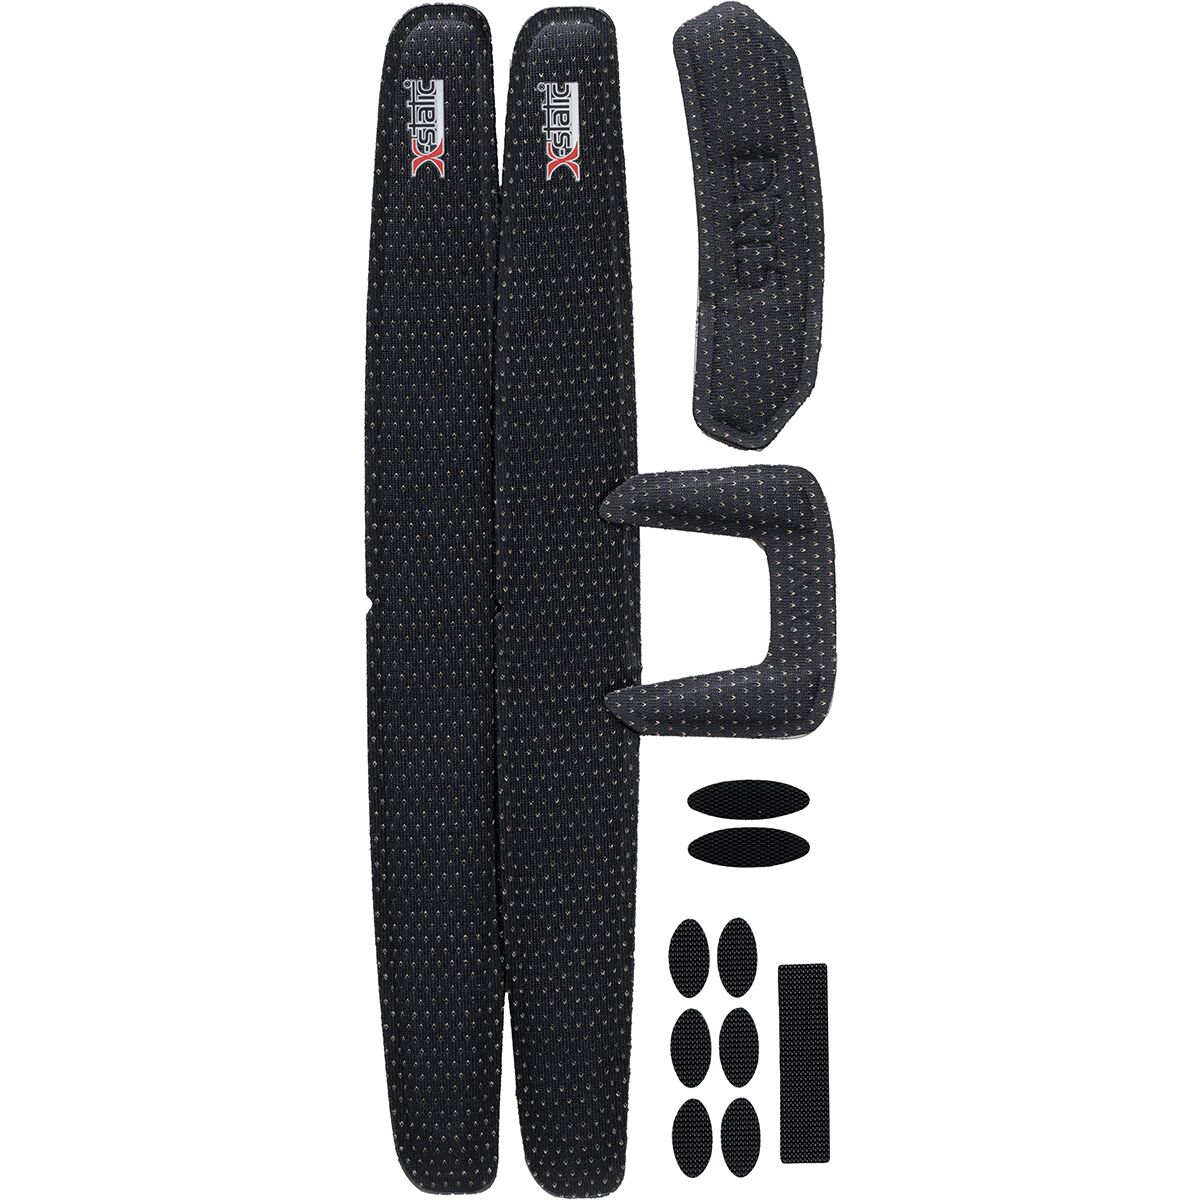 Oakley DRT/ARO Replacement Pads Kit